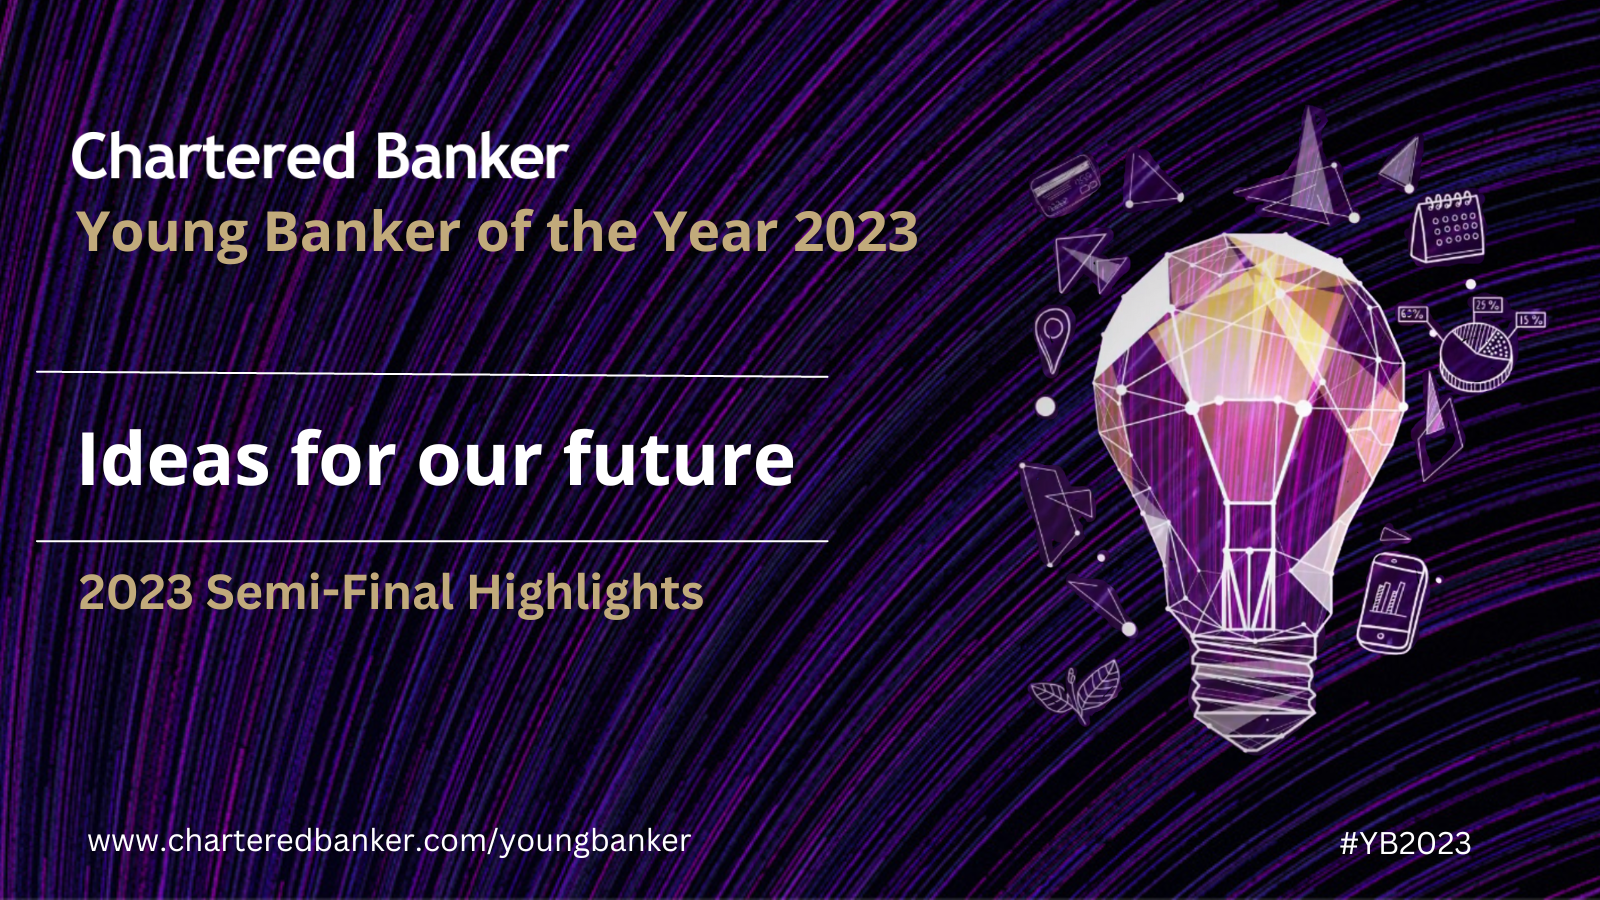 Young Banker of the Year 2023 - Semi-Finals Highlights